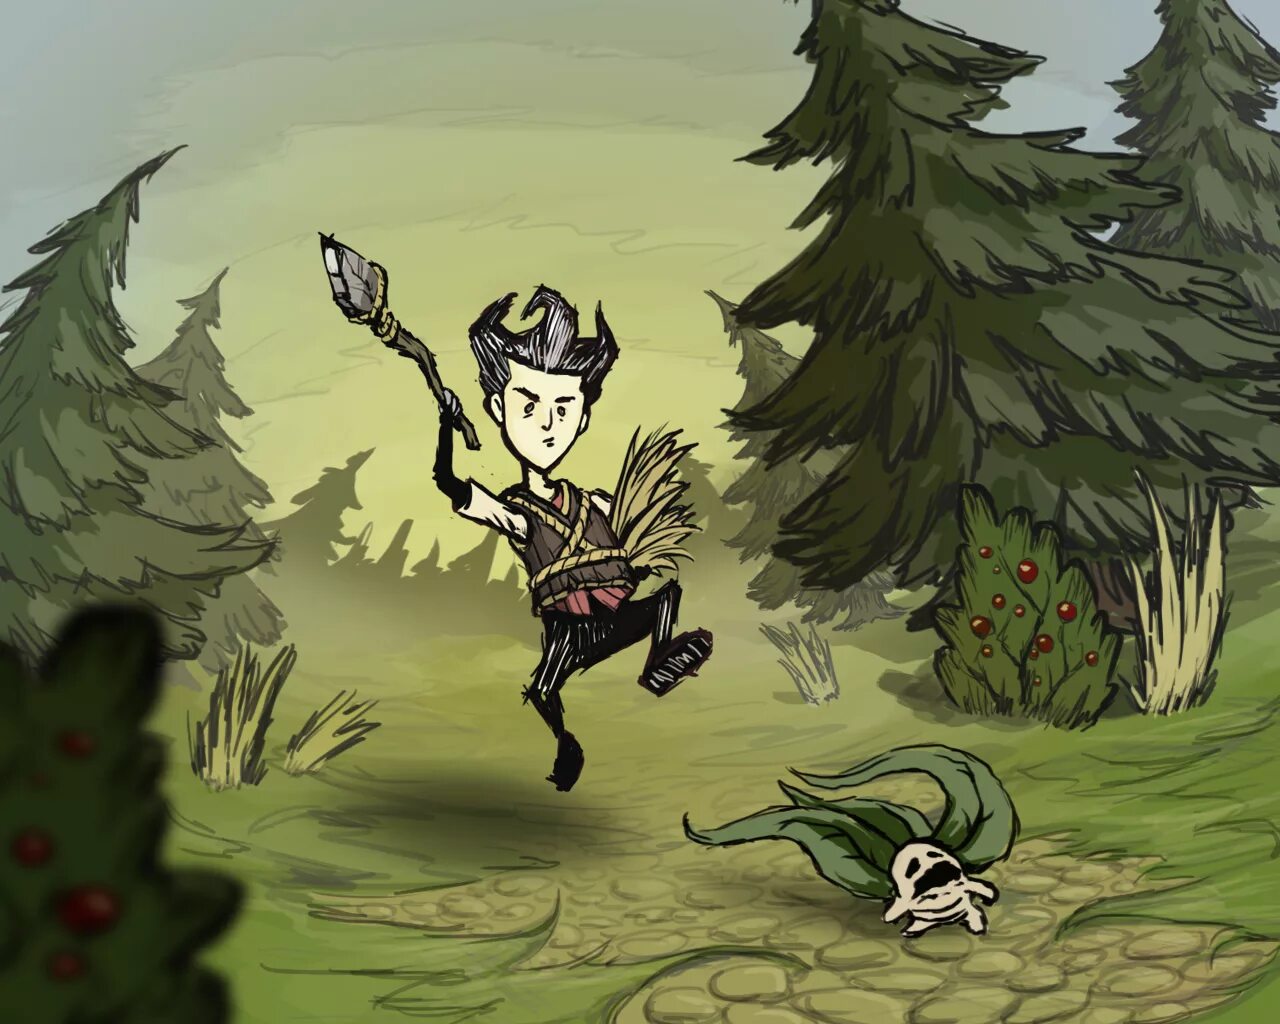 Don t starve gaming. Уилсон don't Starve. Мандрагора don't Starve. Корень Мандрагоры don't Starve. Мандрагора из Дон старв.